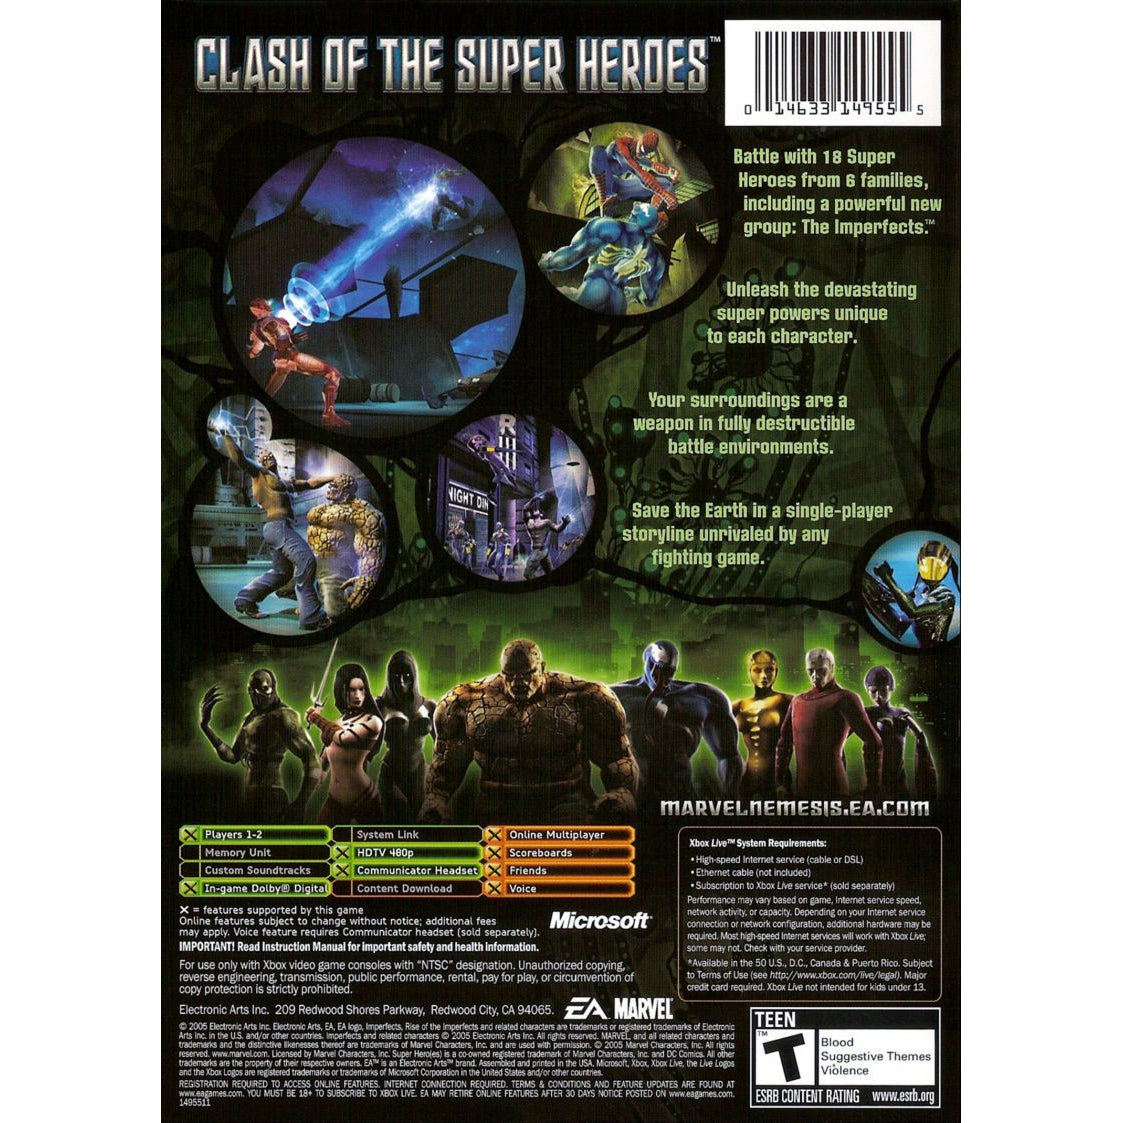 Marvel Nemesis: Rise of the Imperfects - Microsoft Xbox Game Complete - YourGamingShop.com - Buy, Sell, Trade Video Games Online. 120 Day Warranty. Satisfaction Guaranteed.